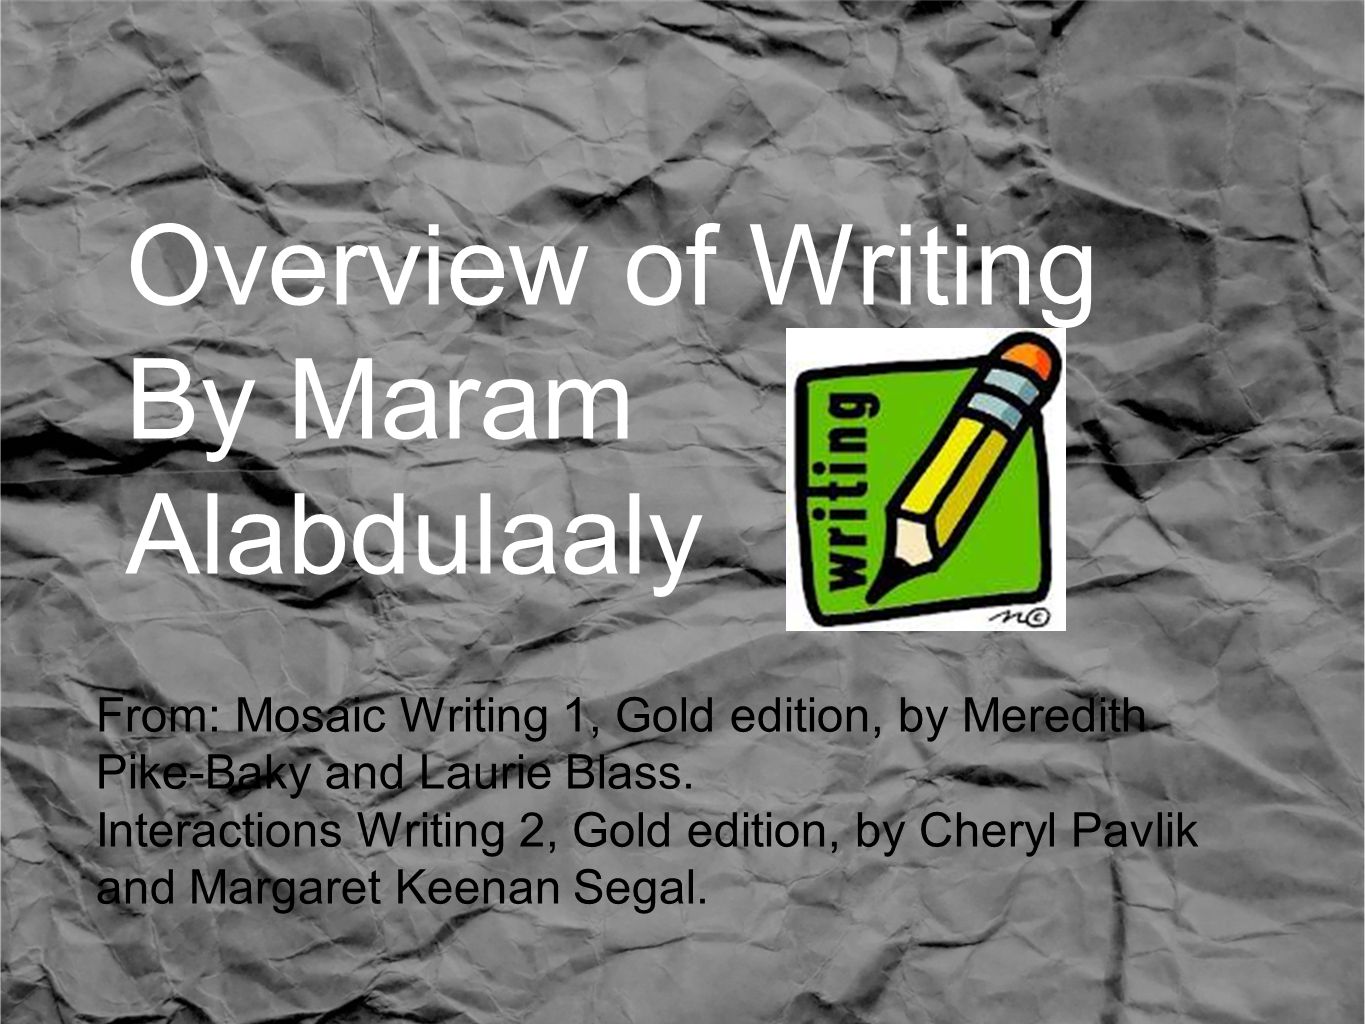 Overview of Writing By Maram Alabdulaaly From: Mosaic Writing 1, Gold edition, by Meredith Pike-Baky and Laurie Blass.